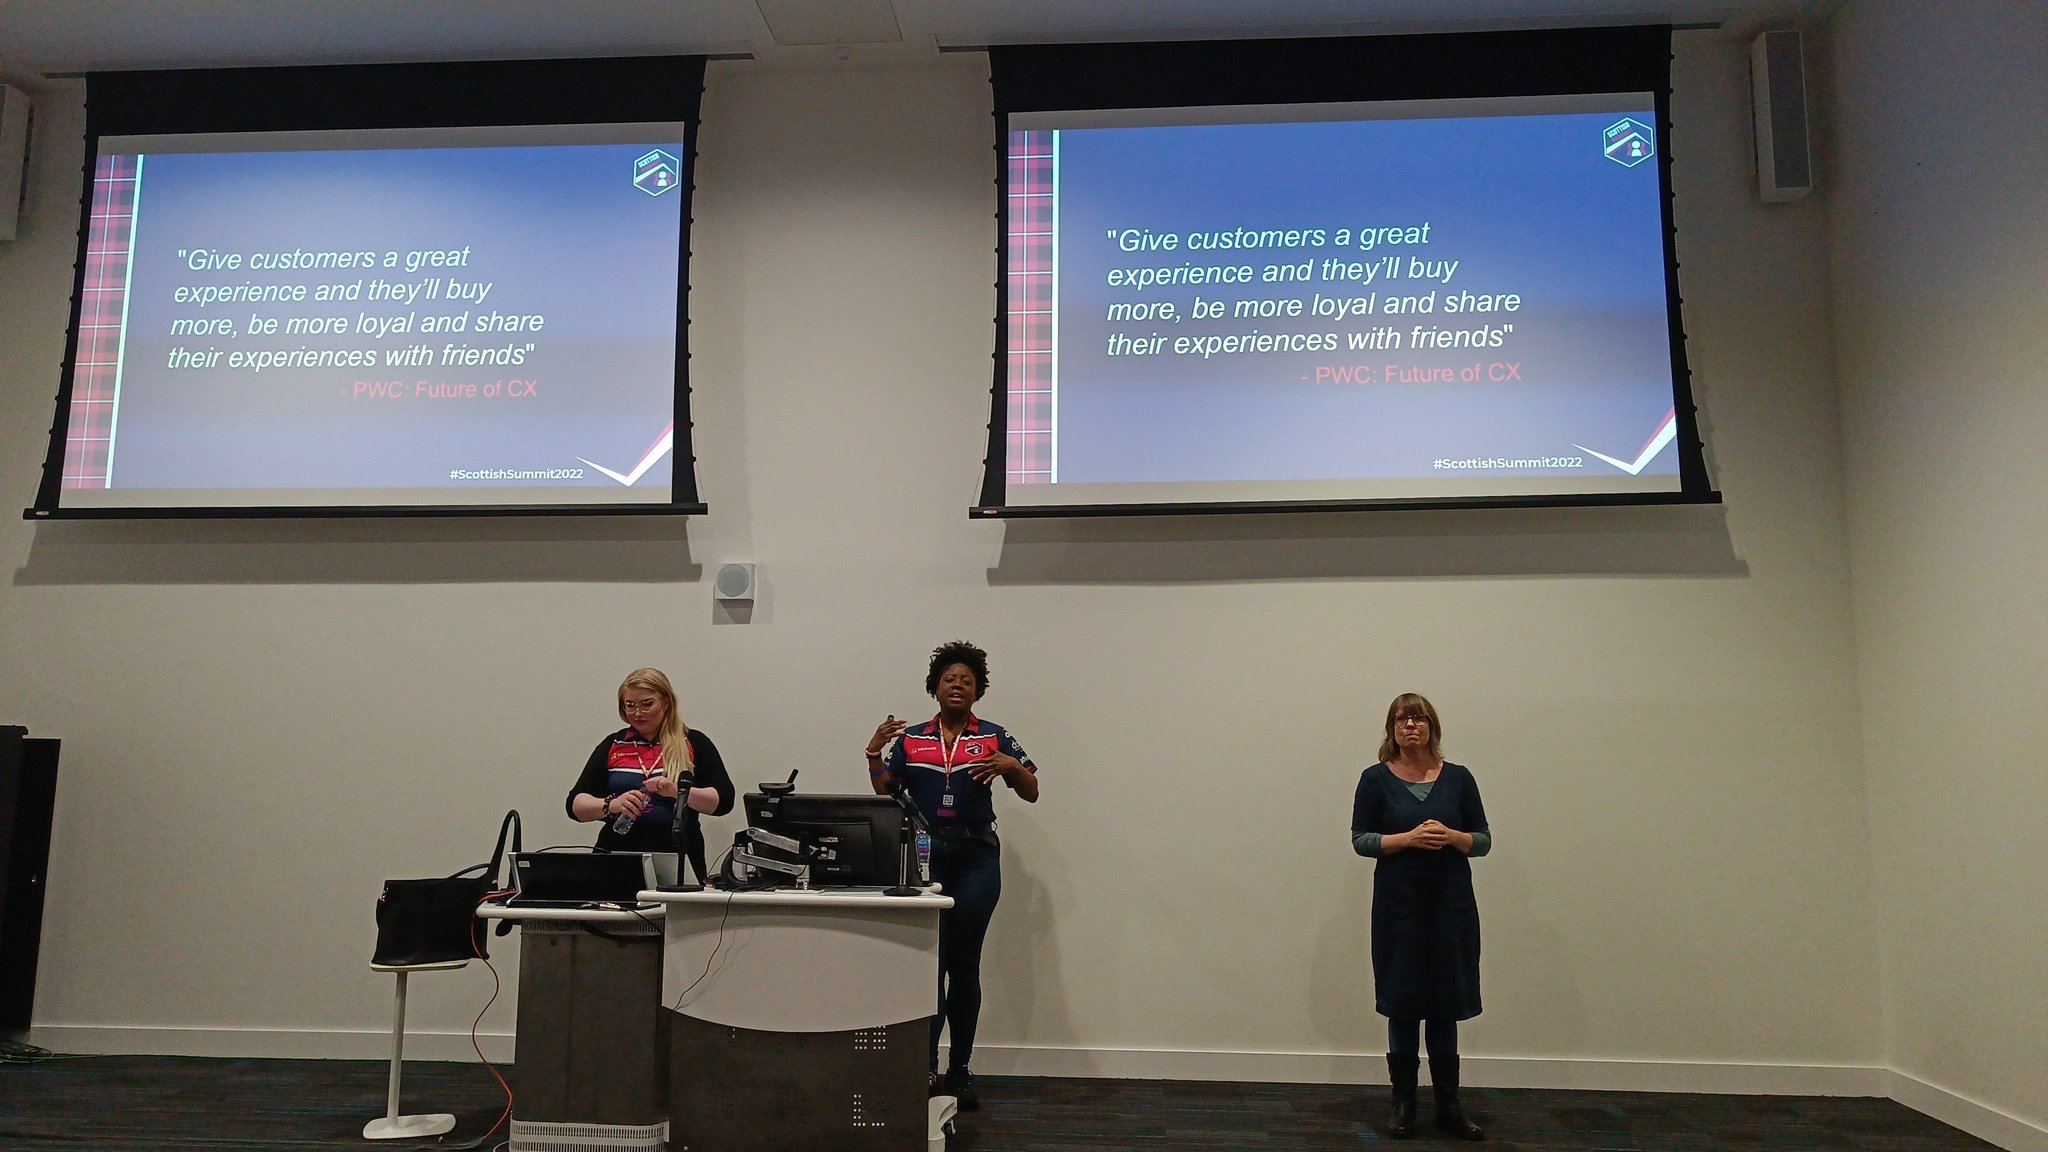 Guro Faller and Tricia Sinclair presenting at Scottish Summit with an interpreter. " large screens with their presentation on the background